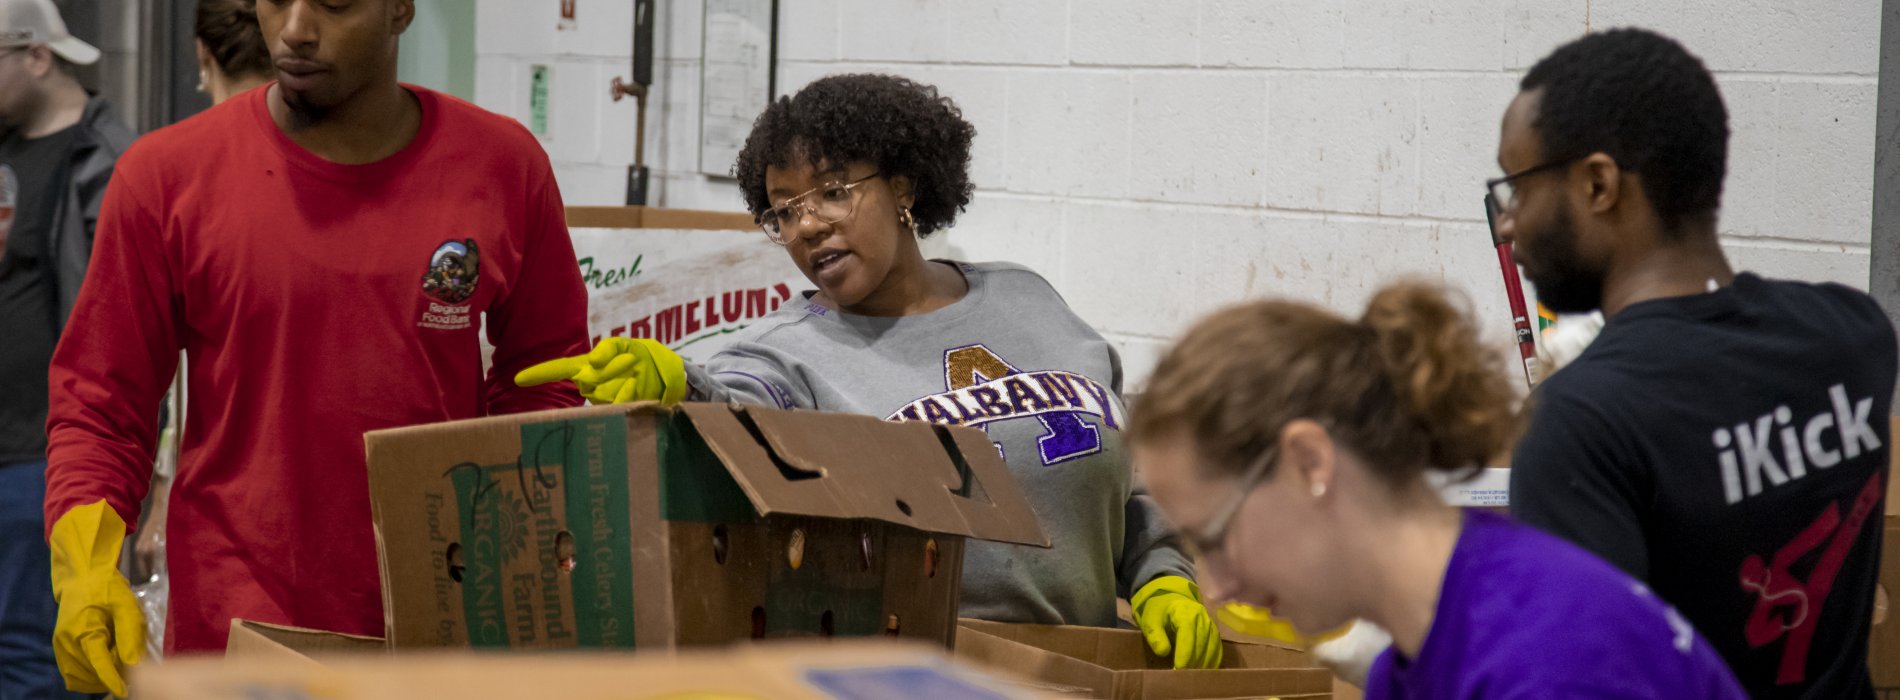 A student at the food bank points at a box of food that needs to be sorted. She is standing behind several boxes of packaged food.